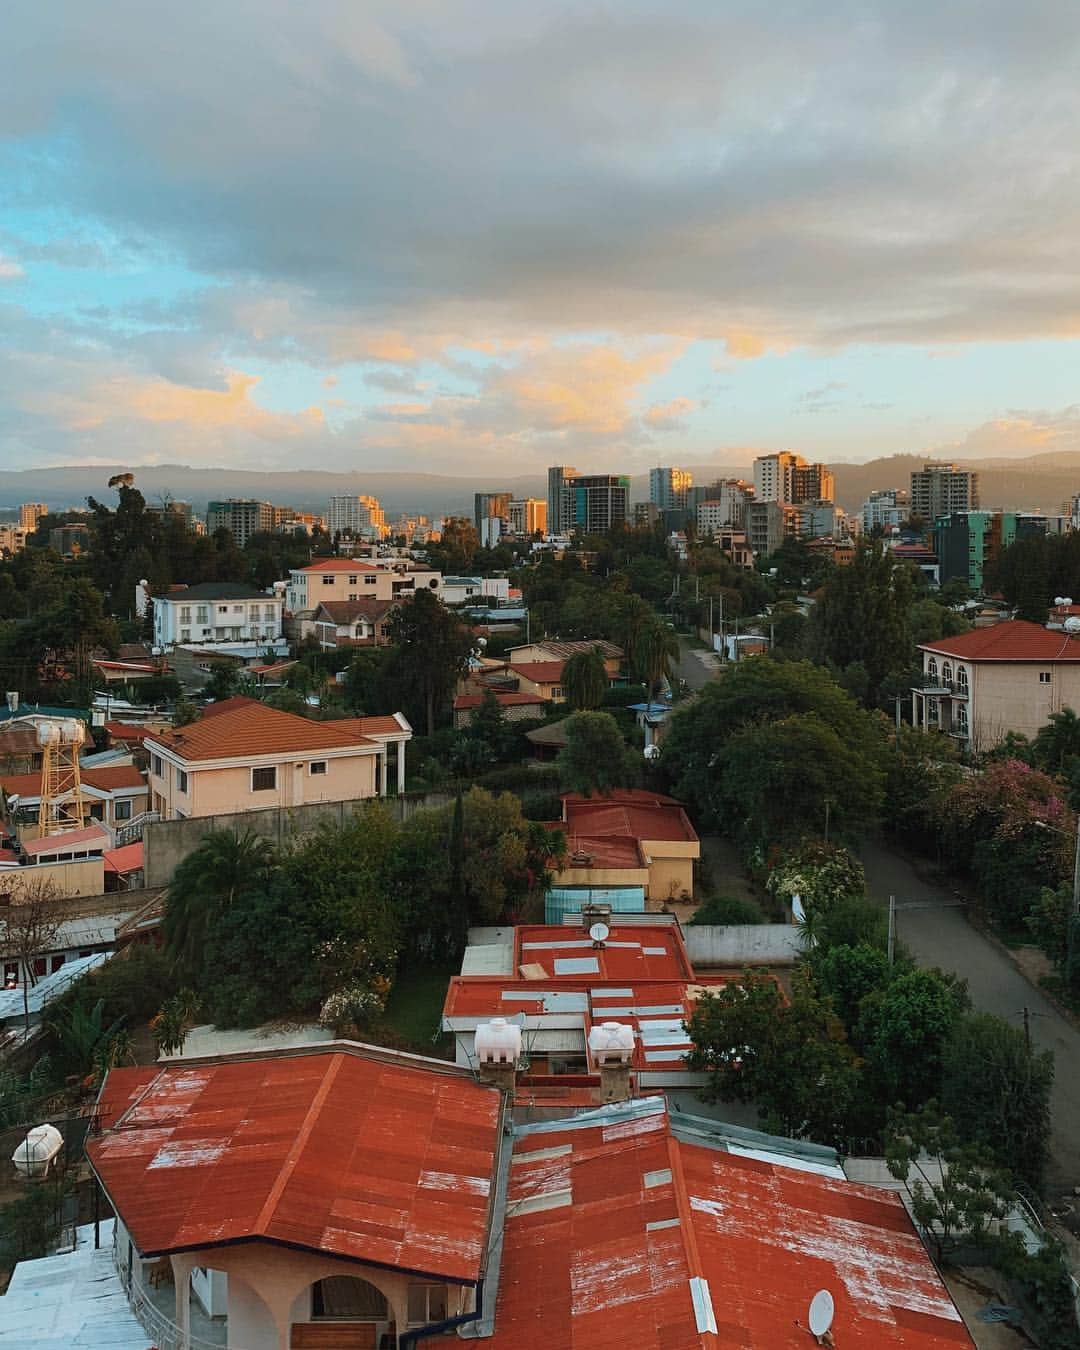 Cubby Grahamのインスタグラム：「Here we go! Quick stopover in Addis Ababa. Woke up just as the sun started to rise over the capital city and the morning colors began to bounce off the buildings. In a few hours we’ll be catching another flight to visit our local partners in the North. Can’t wait to spend the next few weeks with them! 🇪🇹 #charitywaterethiopia」